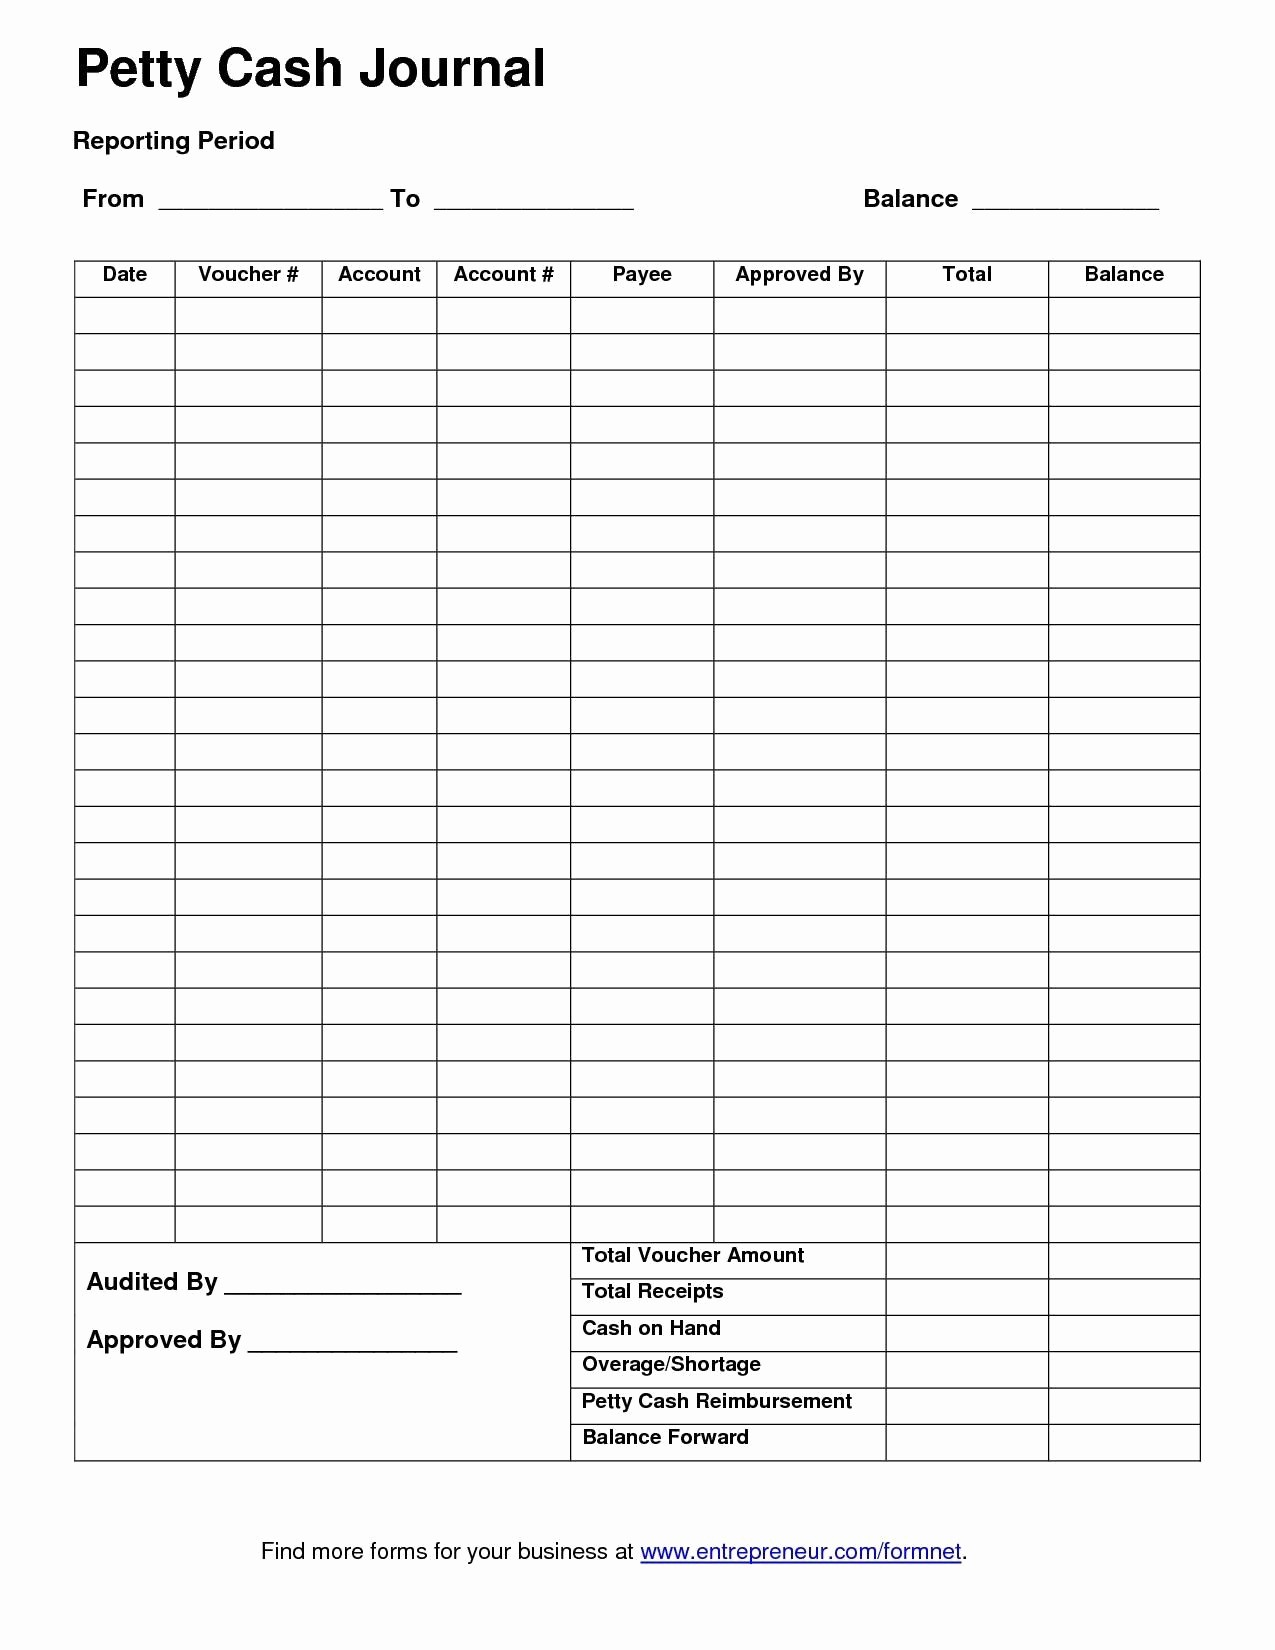 Daily Cash Report Template Excel Lovely Template for Petty Cash Petty Cash Report Template Excel